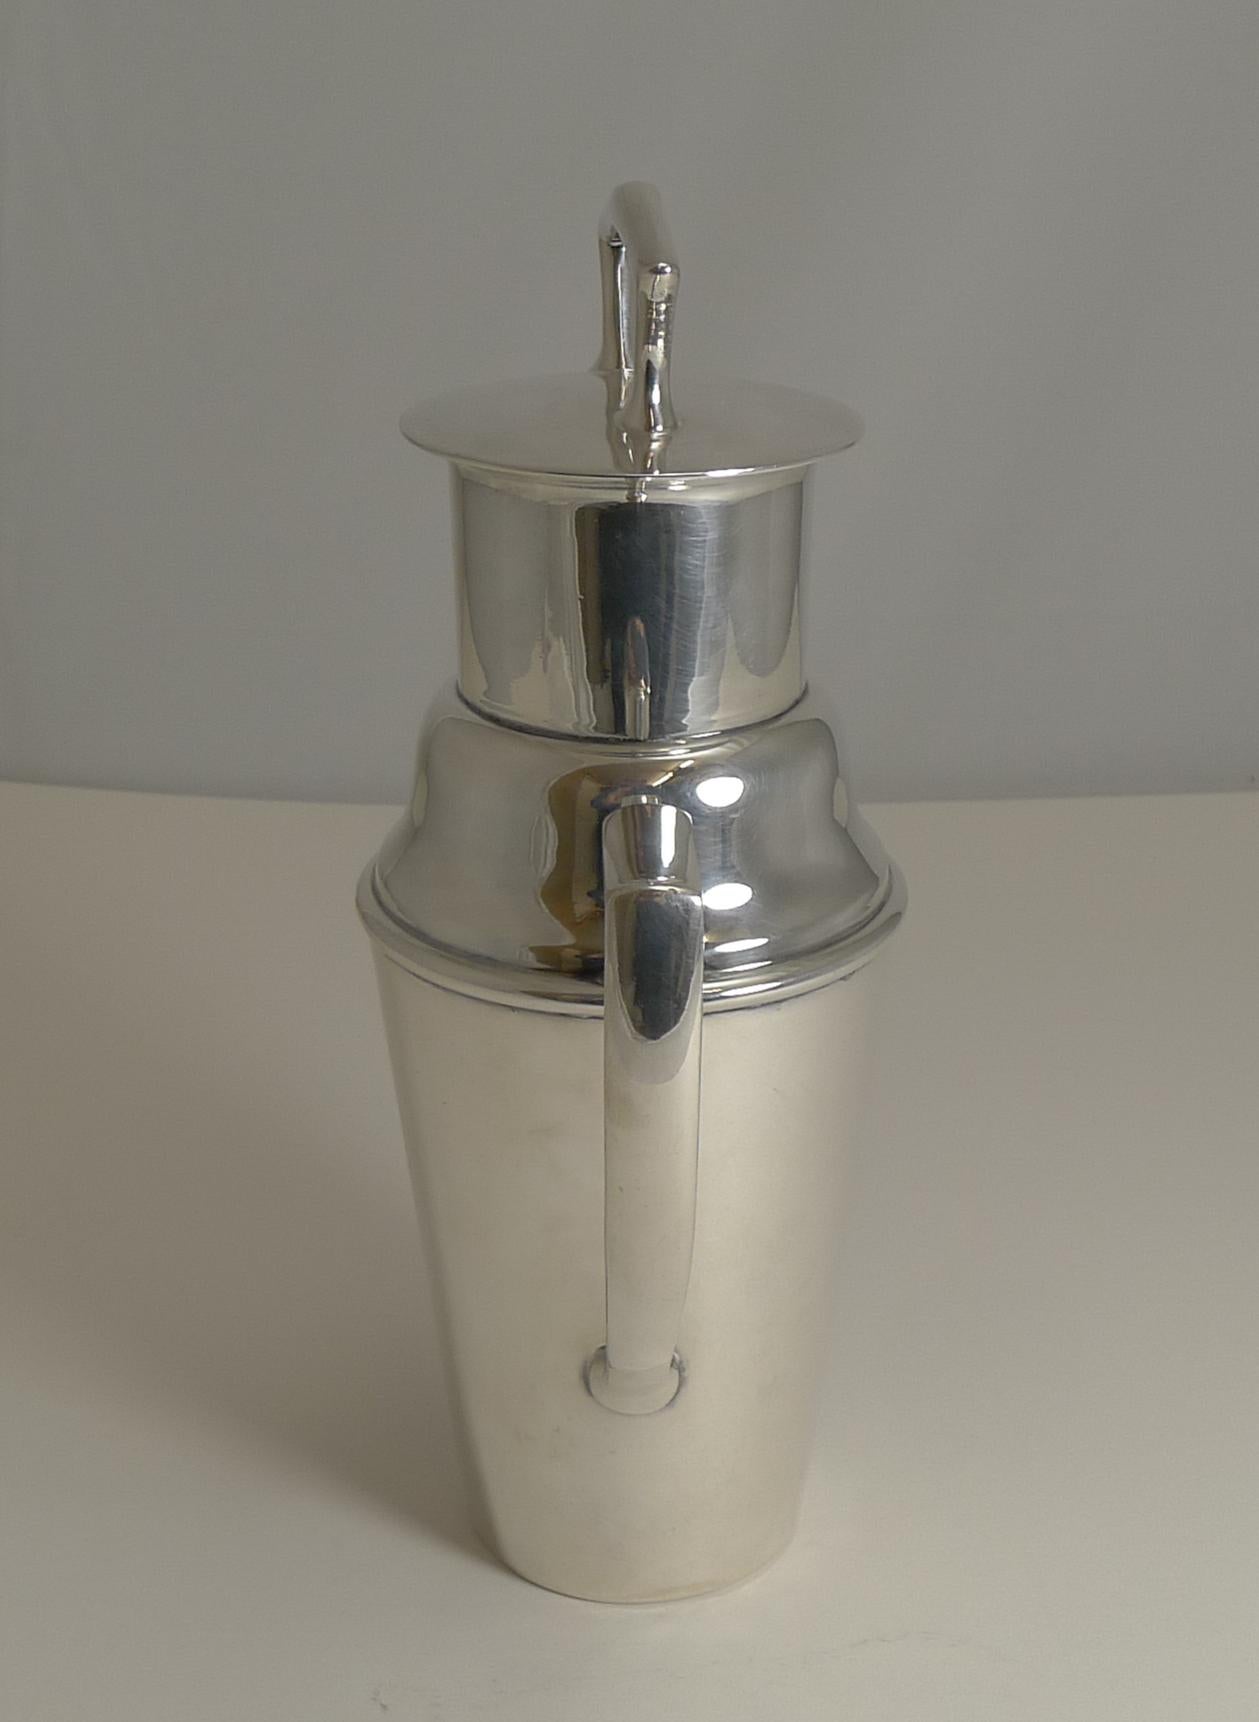 A highly sought-after cocktail Shaker by the creme de la creme of silversmiths, Asprey of London.

Made in the form of a milk churn with an Art Deco inspired take with it's angular handle and handle to remove the top.

Fully marked on the